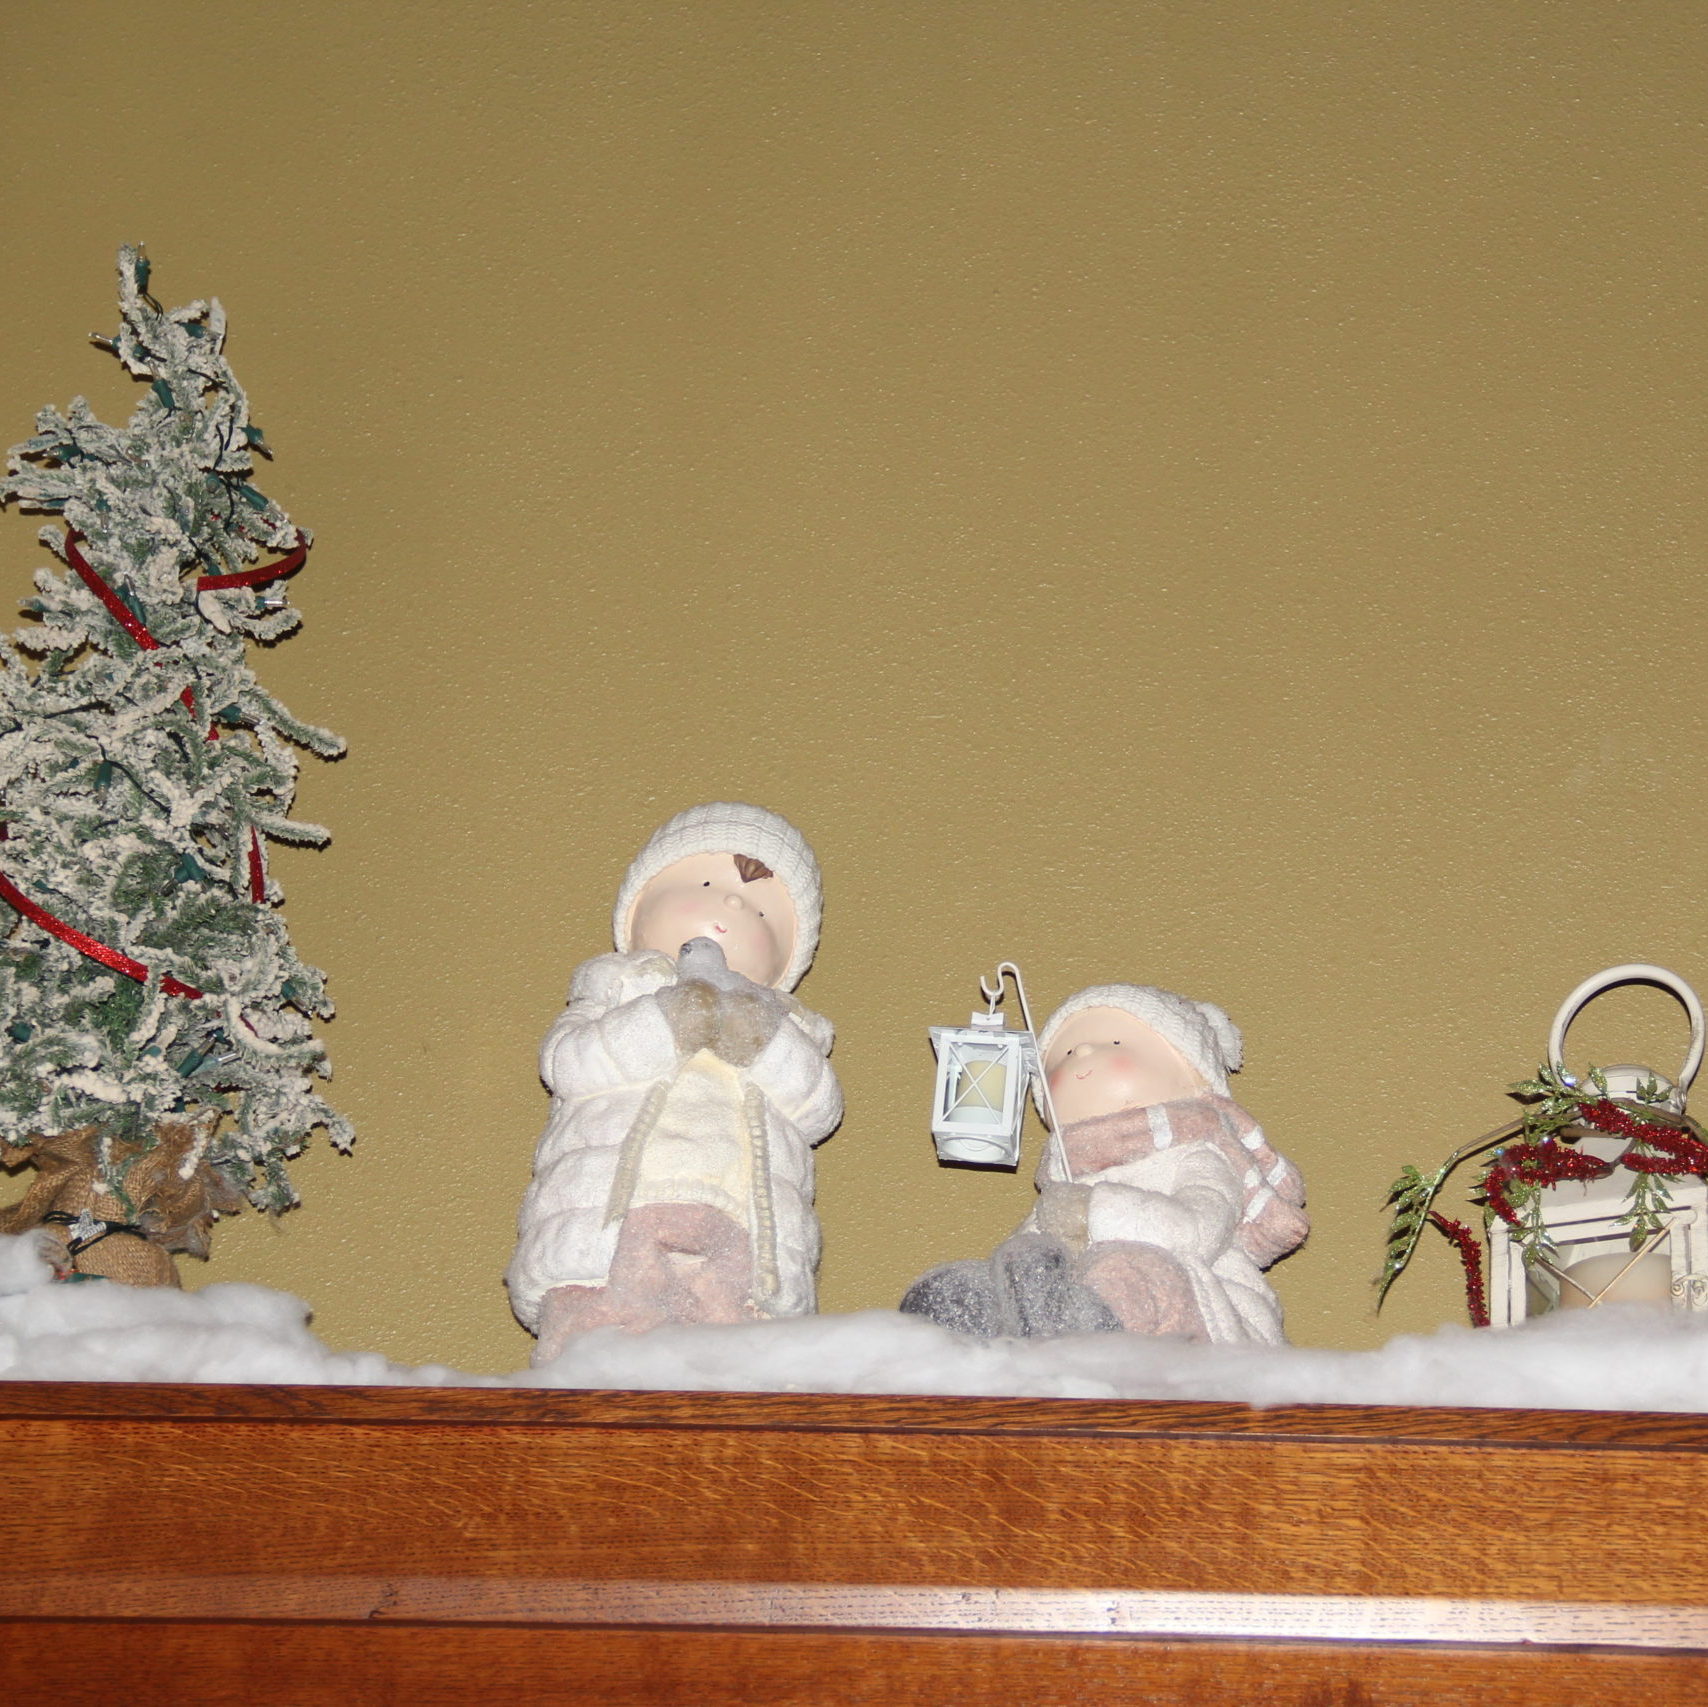 For the other side a couple of more kid statues, lanterns in white from Pier One and a smaller flocked pine from Earthly Blessings.